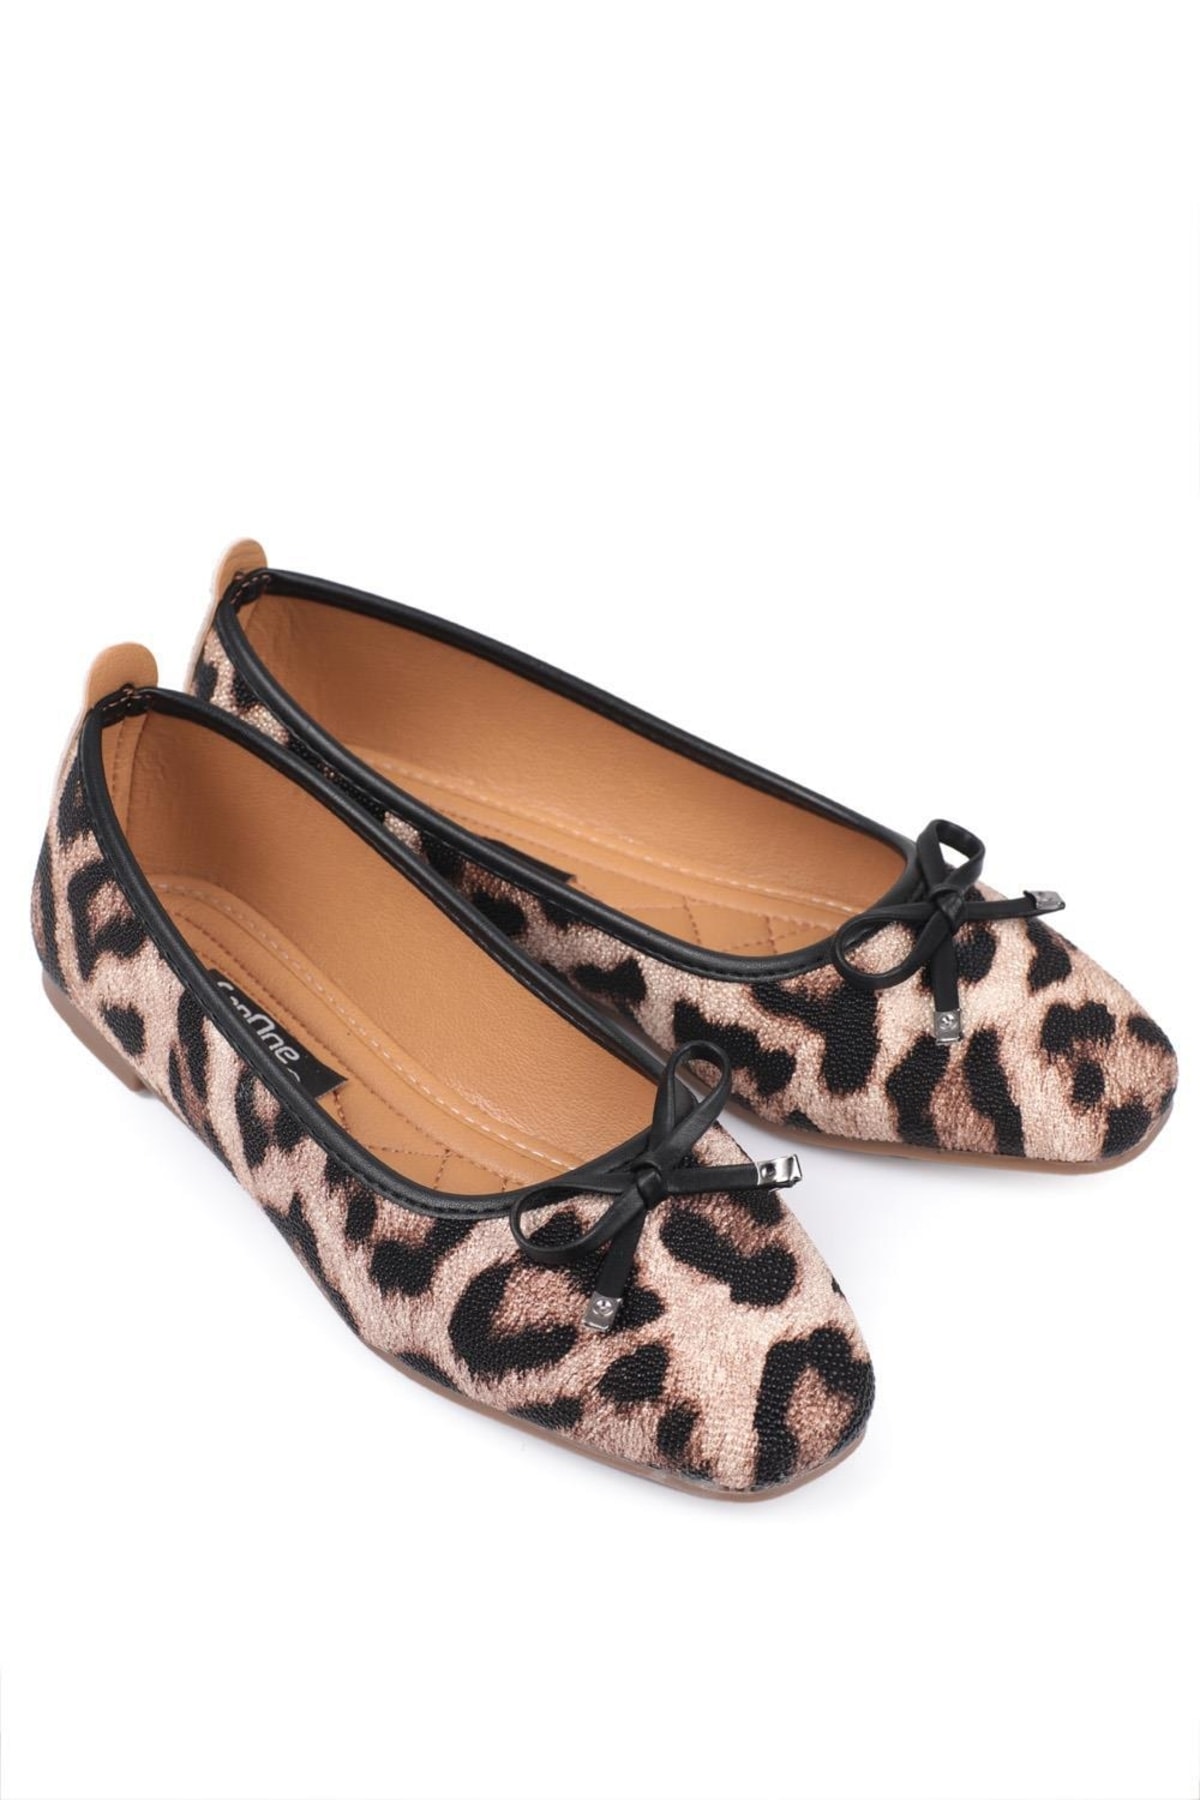 Capone Outfitters Ballerina Flats - Brown - Flat